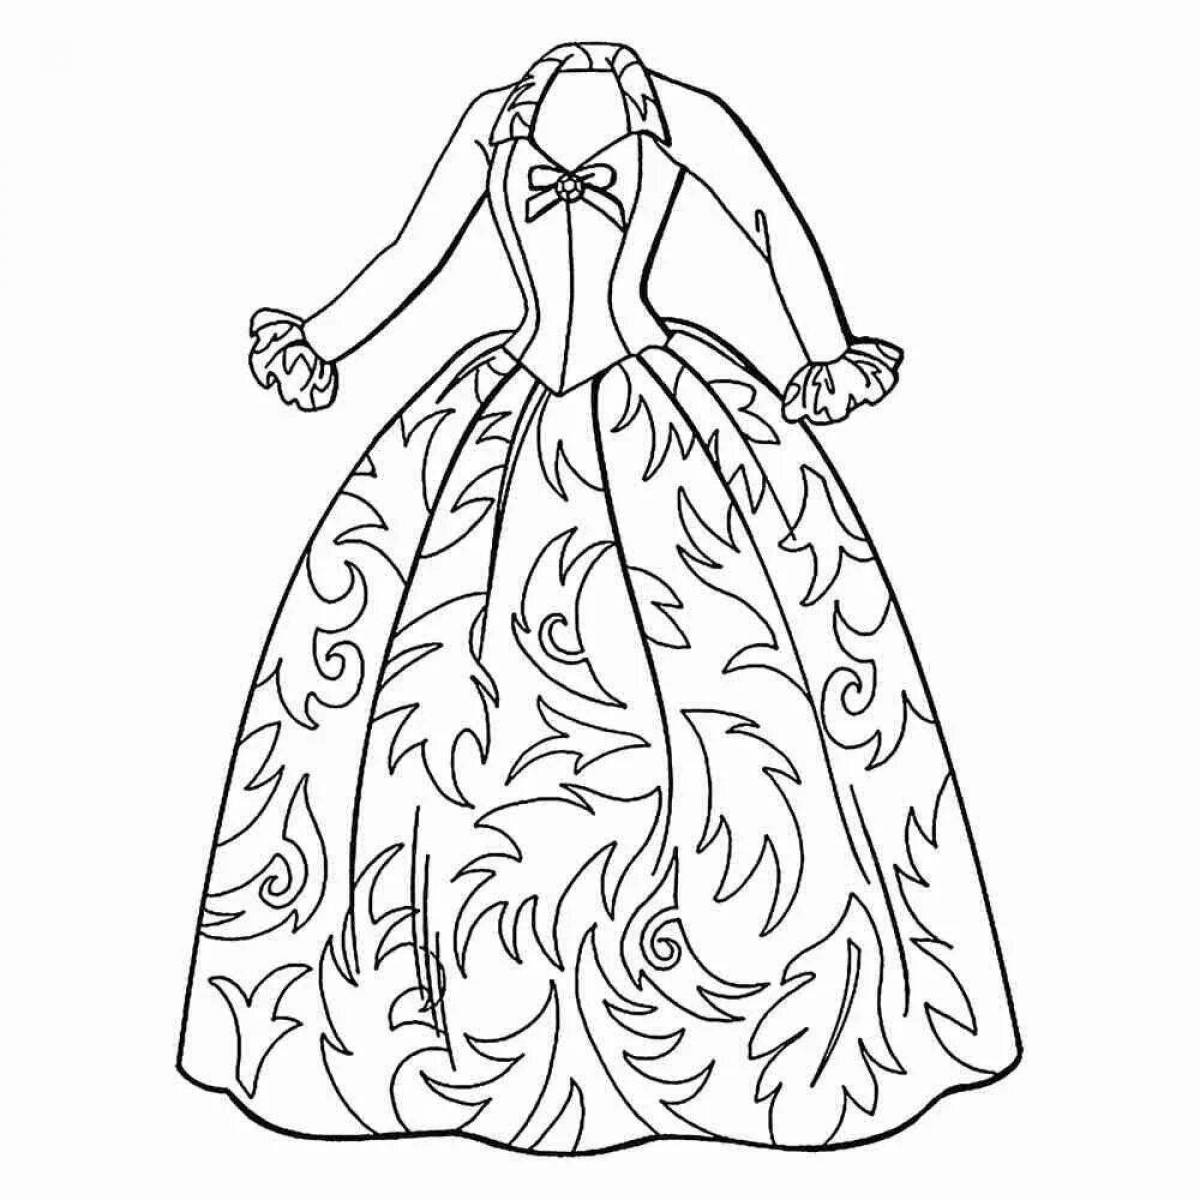 Ball gown with ornate coloring